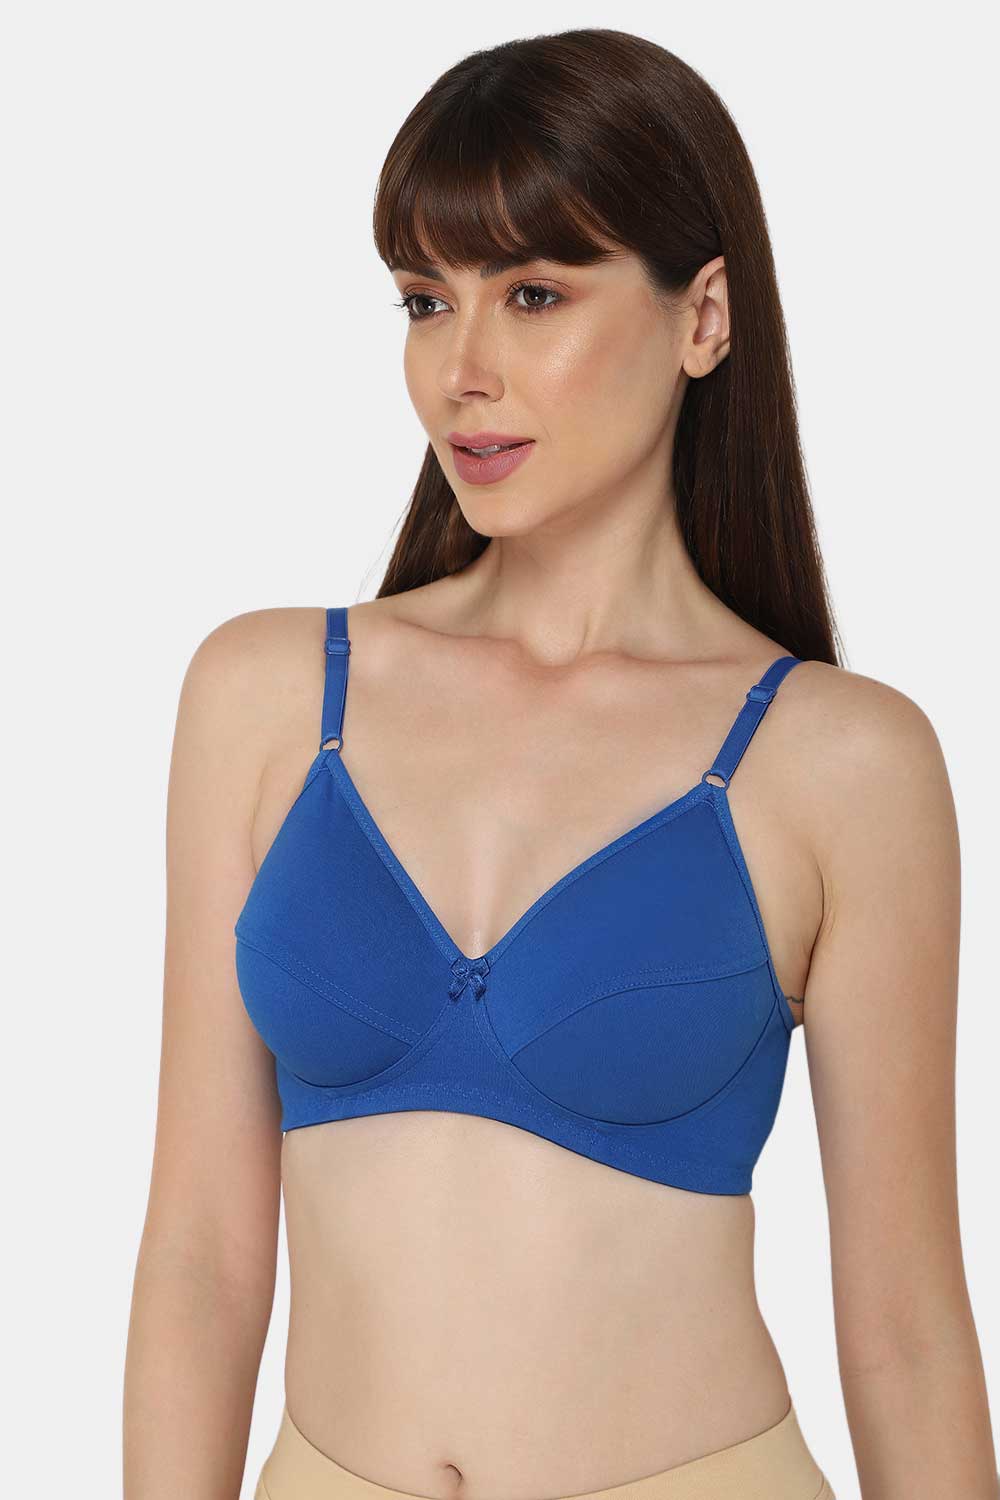 38 Size Bras: Buy 38 Size Bras for Women Online at Low Prices - Snapdeal  India